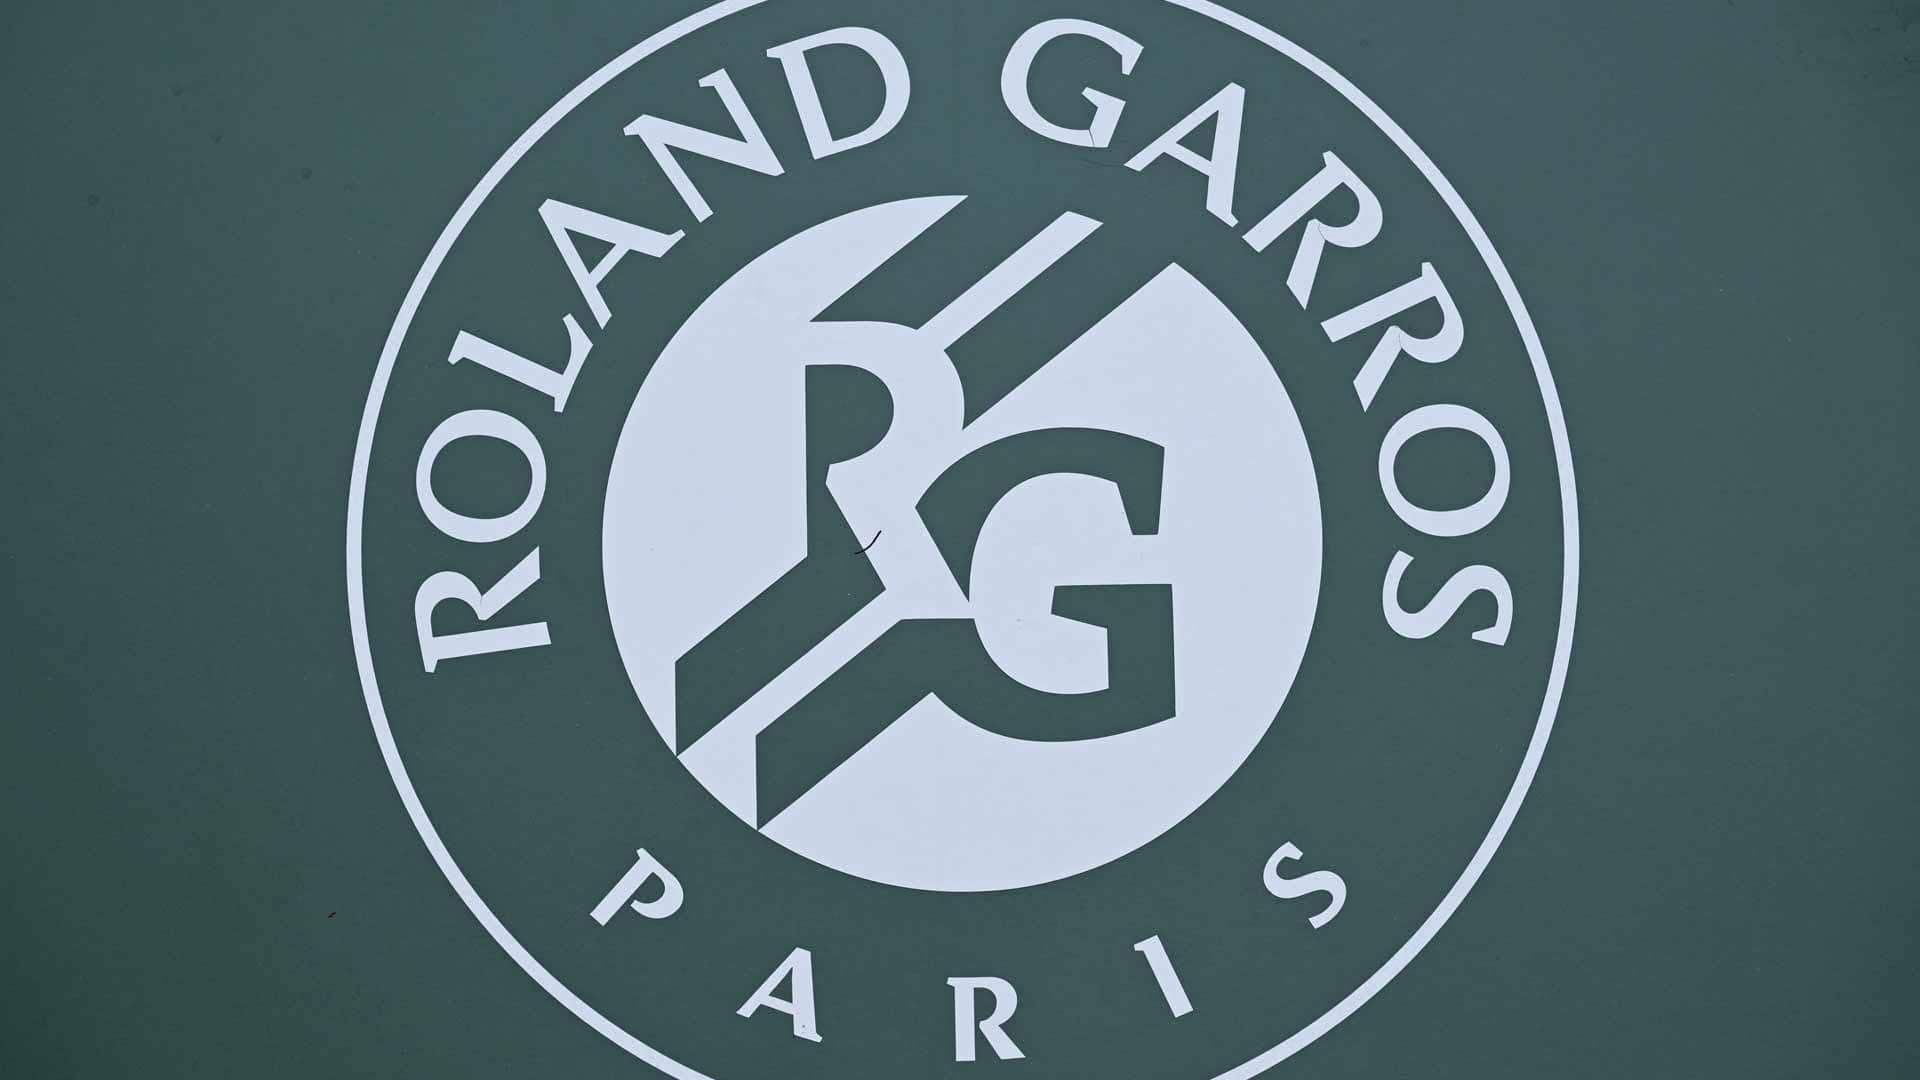 Roland Garros will be played from 28 May-11 June.